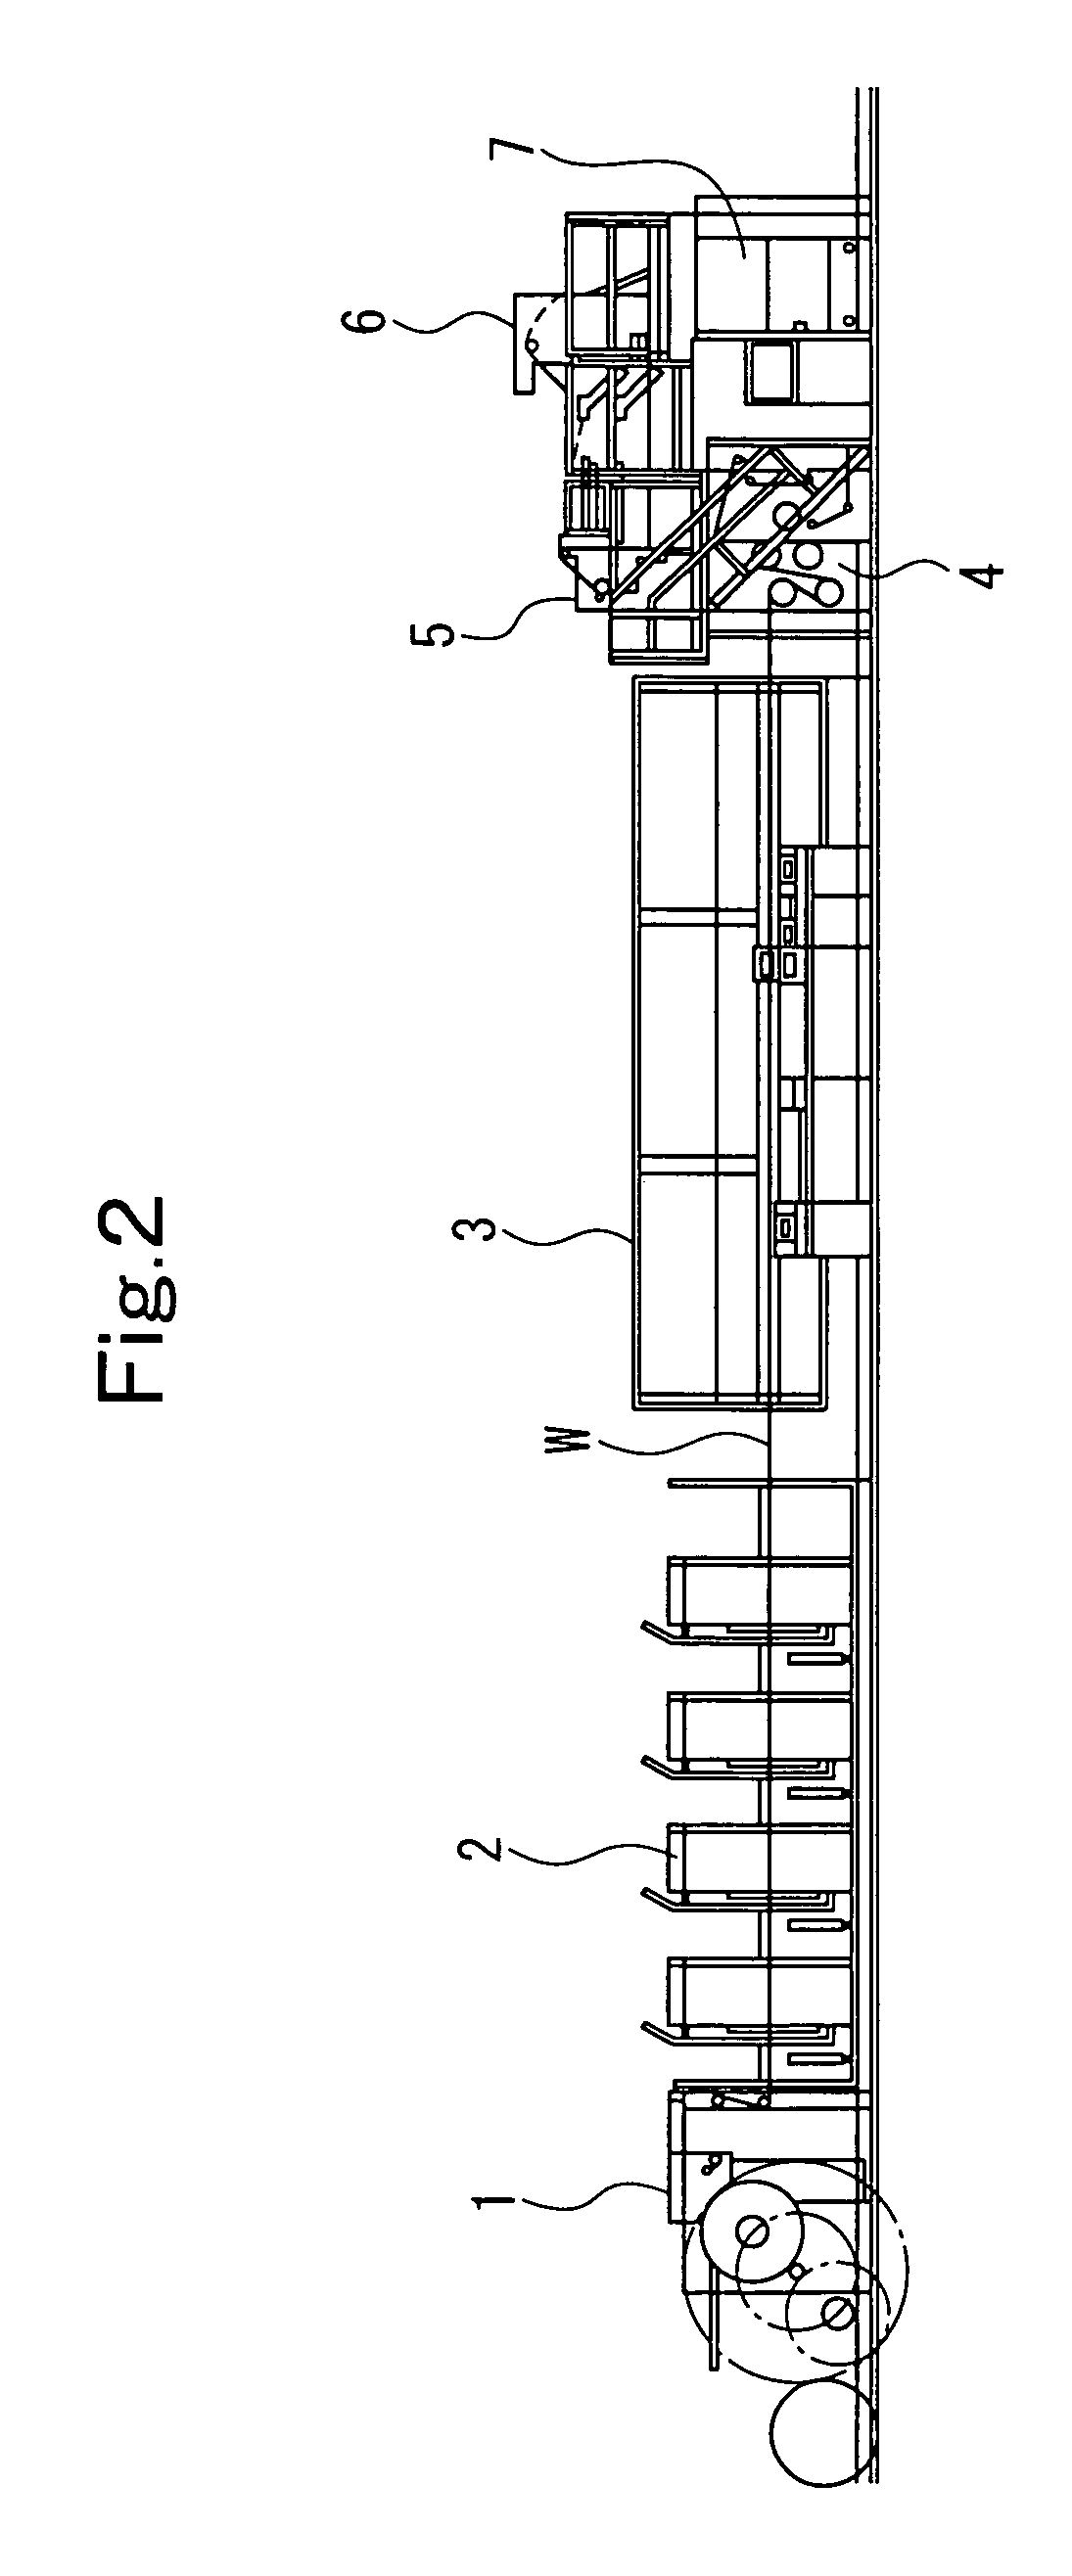 Strip continuous supply apparatus and method